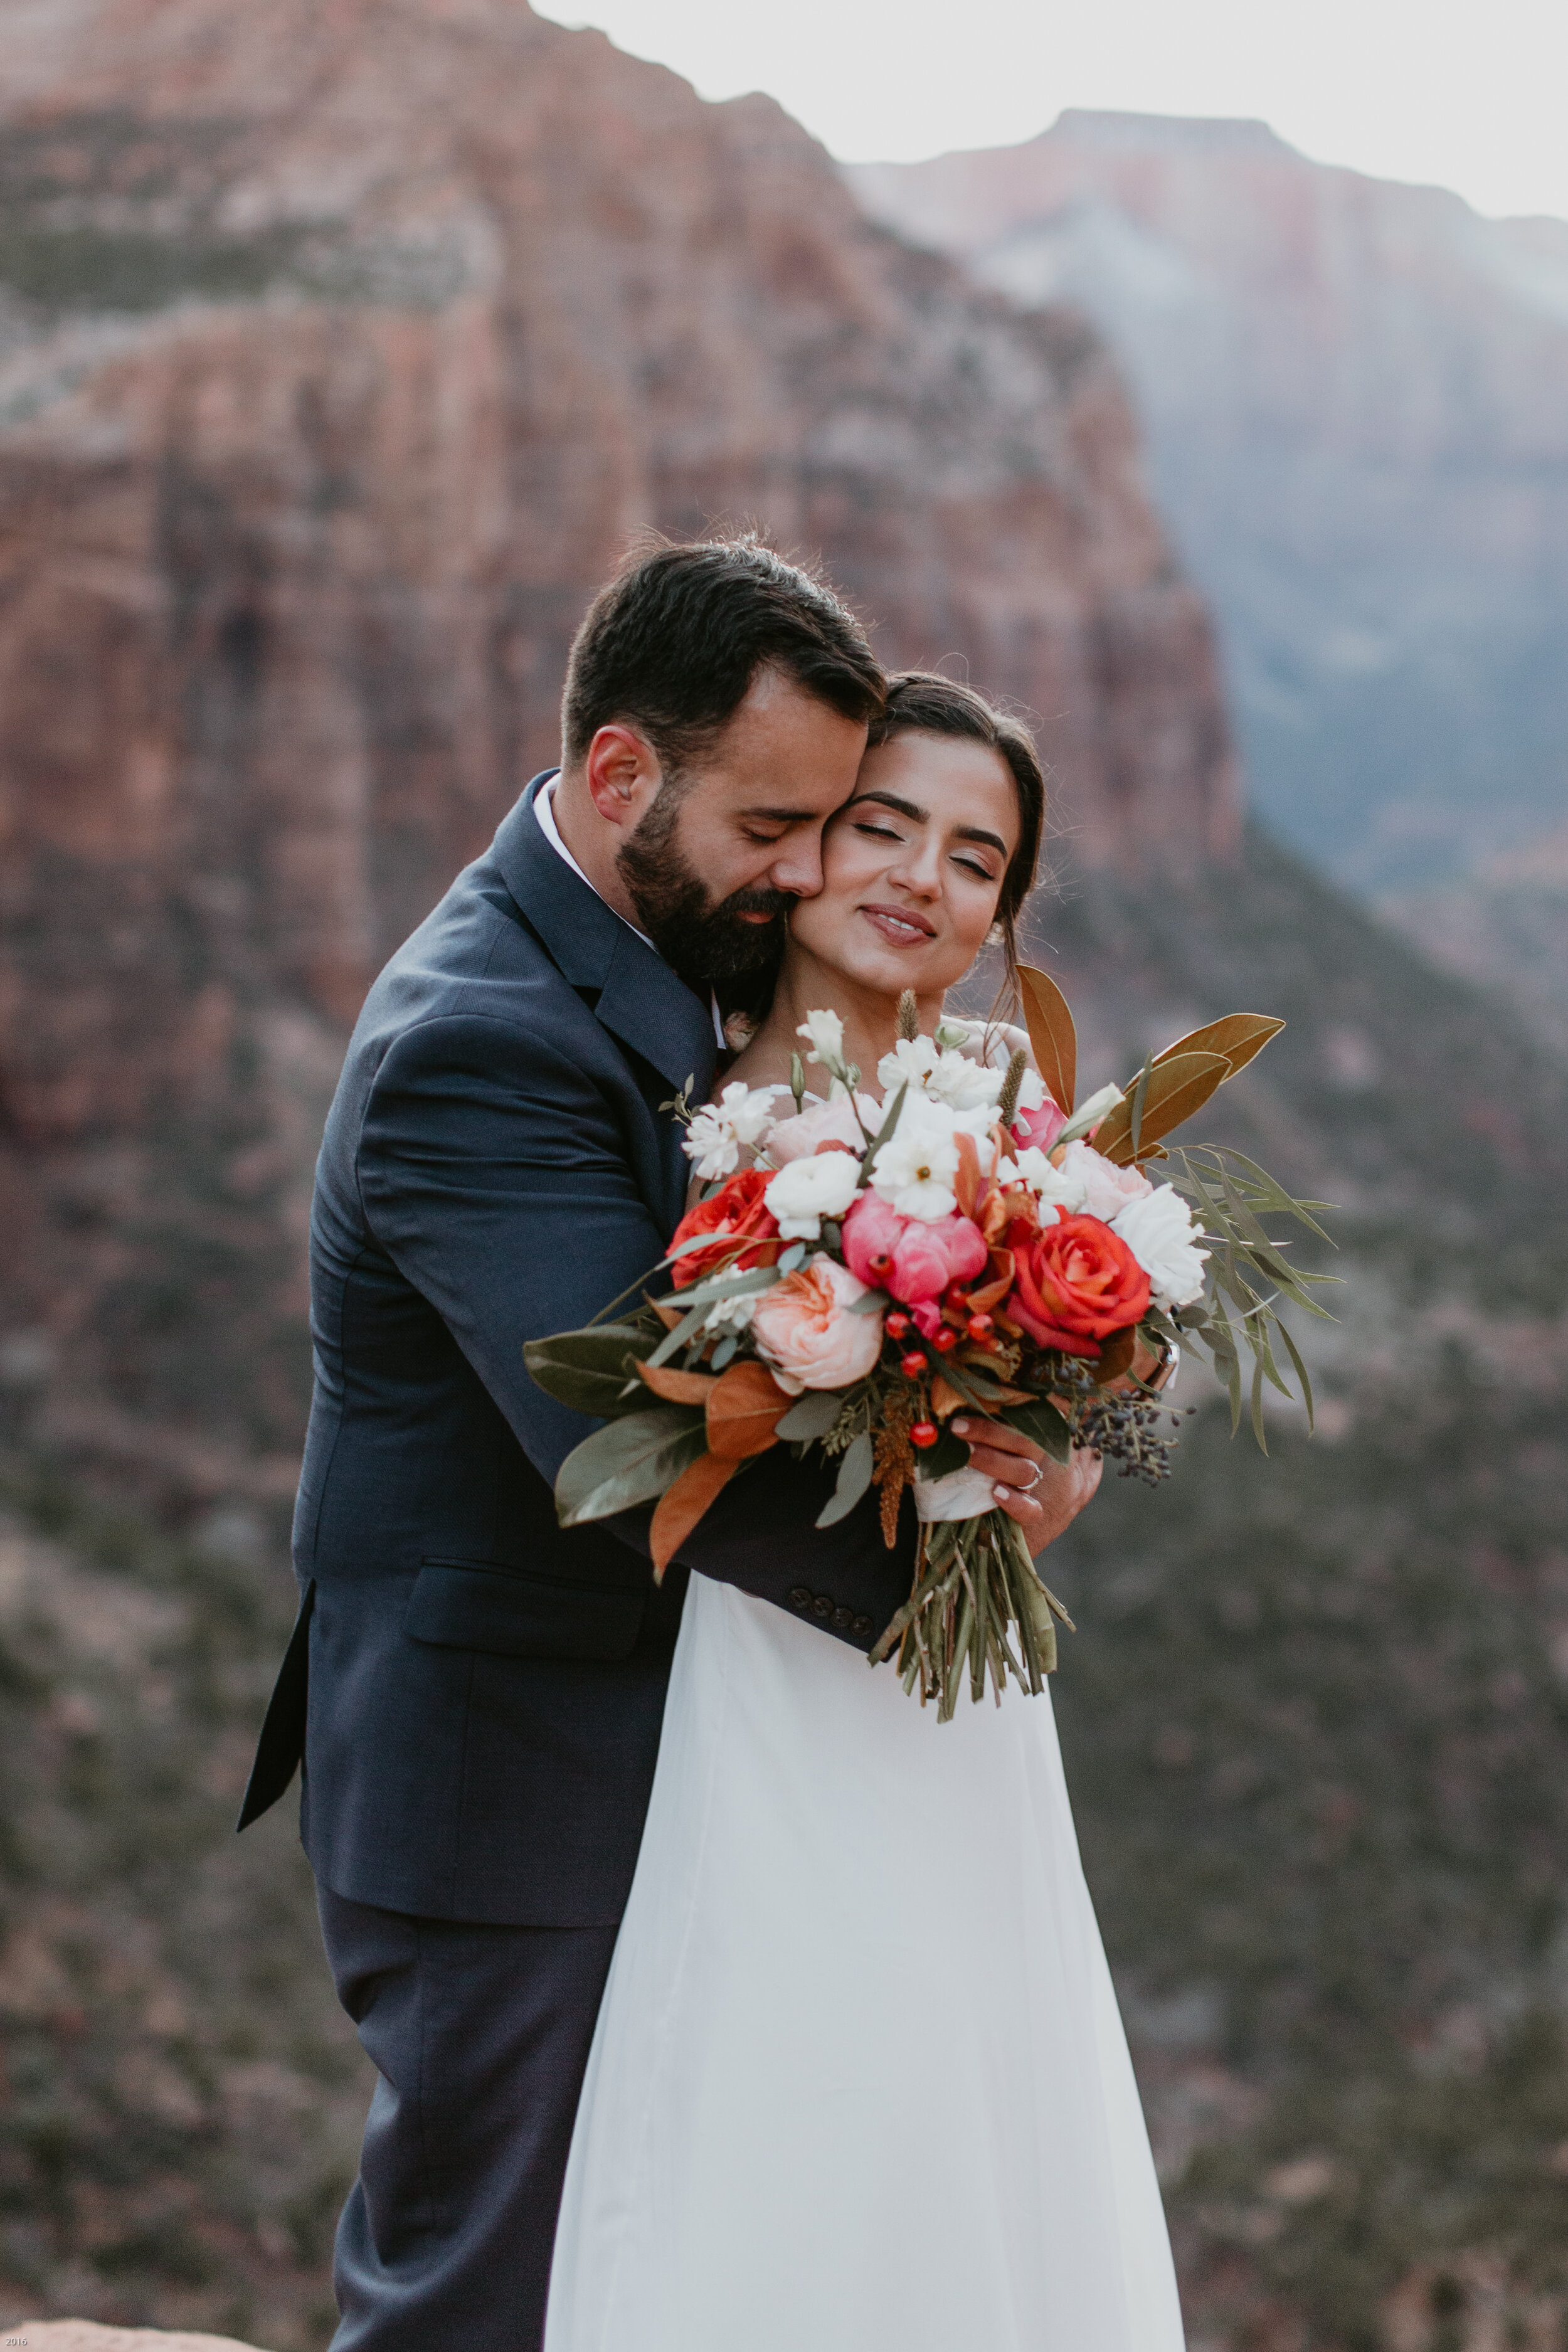 Nicole-Daacke-Photography-snowy-hiking-elopement-in-zion-national-park-zion-elopement-photographer-canyon-overlook-trial-brial-portraits-in-mt-zion-national-park-utah-desert-adventure-elopement-photographer-158.jpg